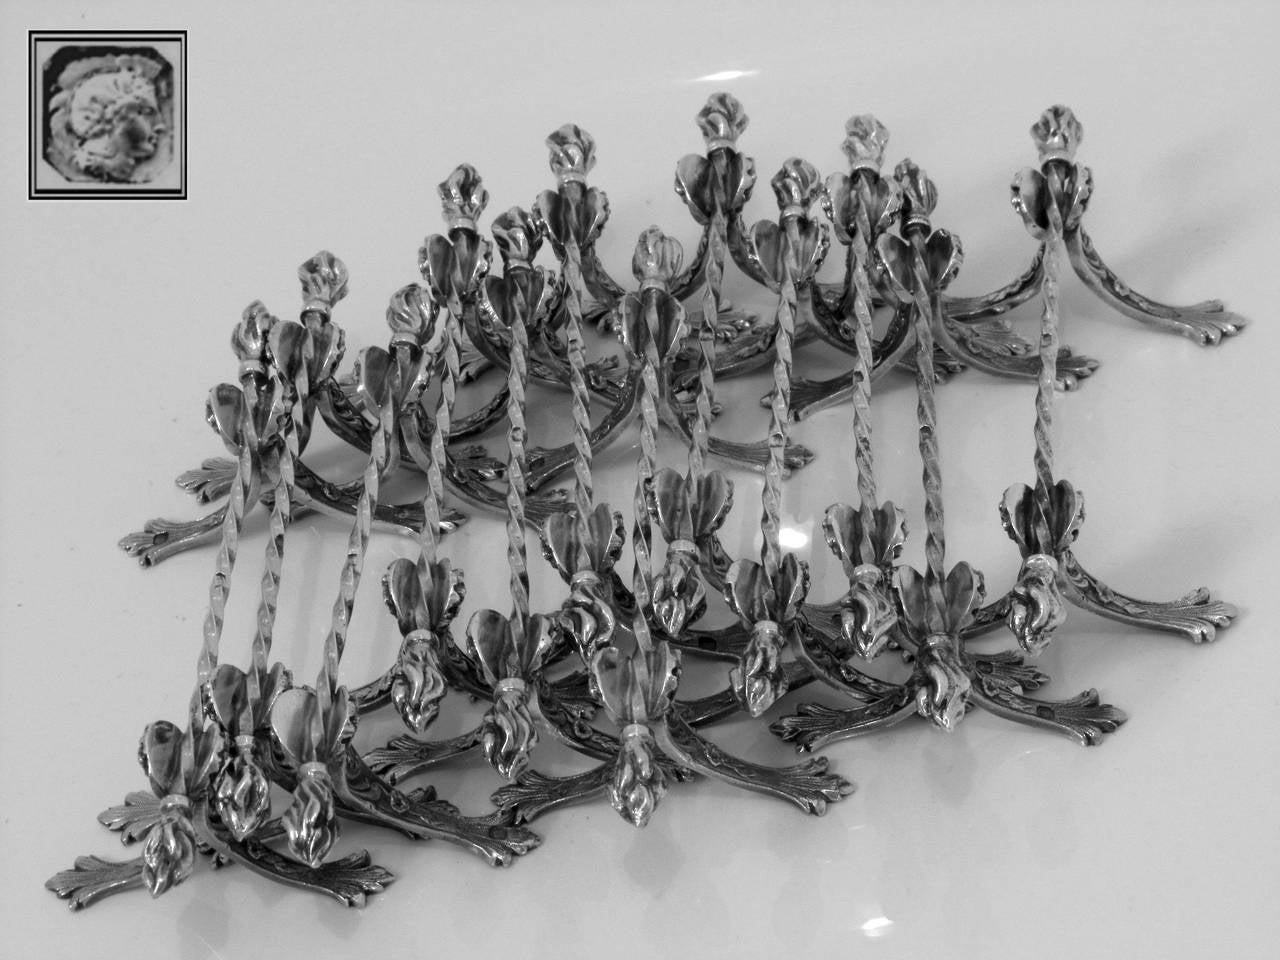 Queille Amazing French All Sterling Silver Knife Rests Set 12 pc Torches model

Extremely rare model of knife rests set. It is even rarer to see full service of 12 pieces of french sterling silver. These objects are usually made of silverplate.